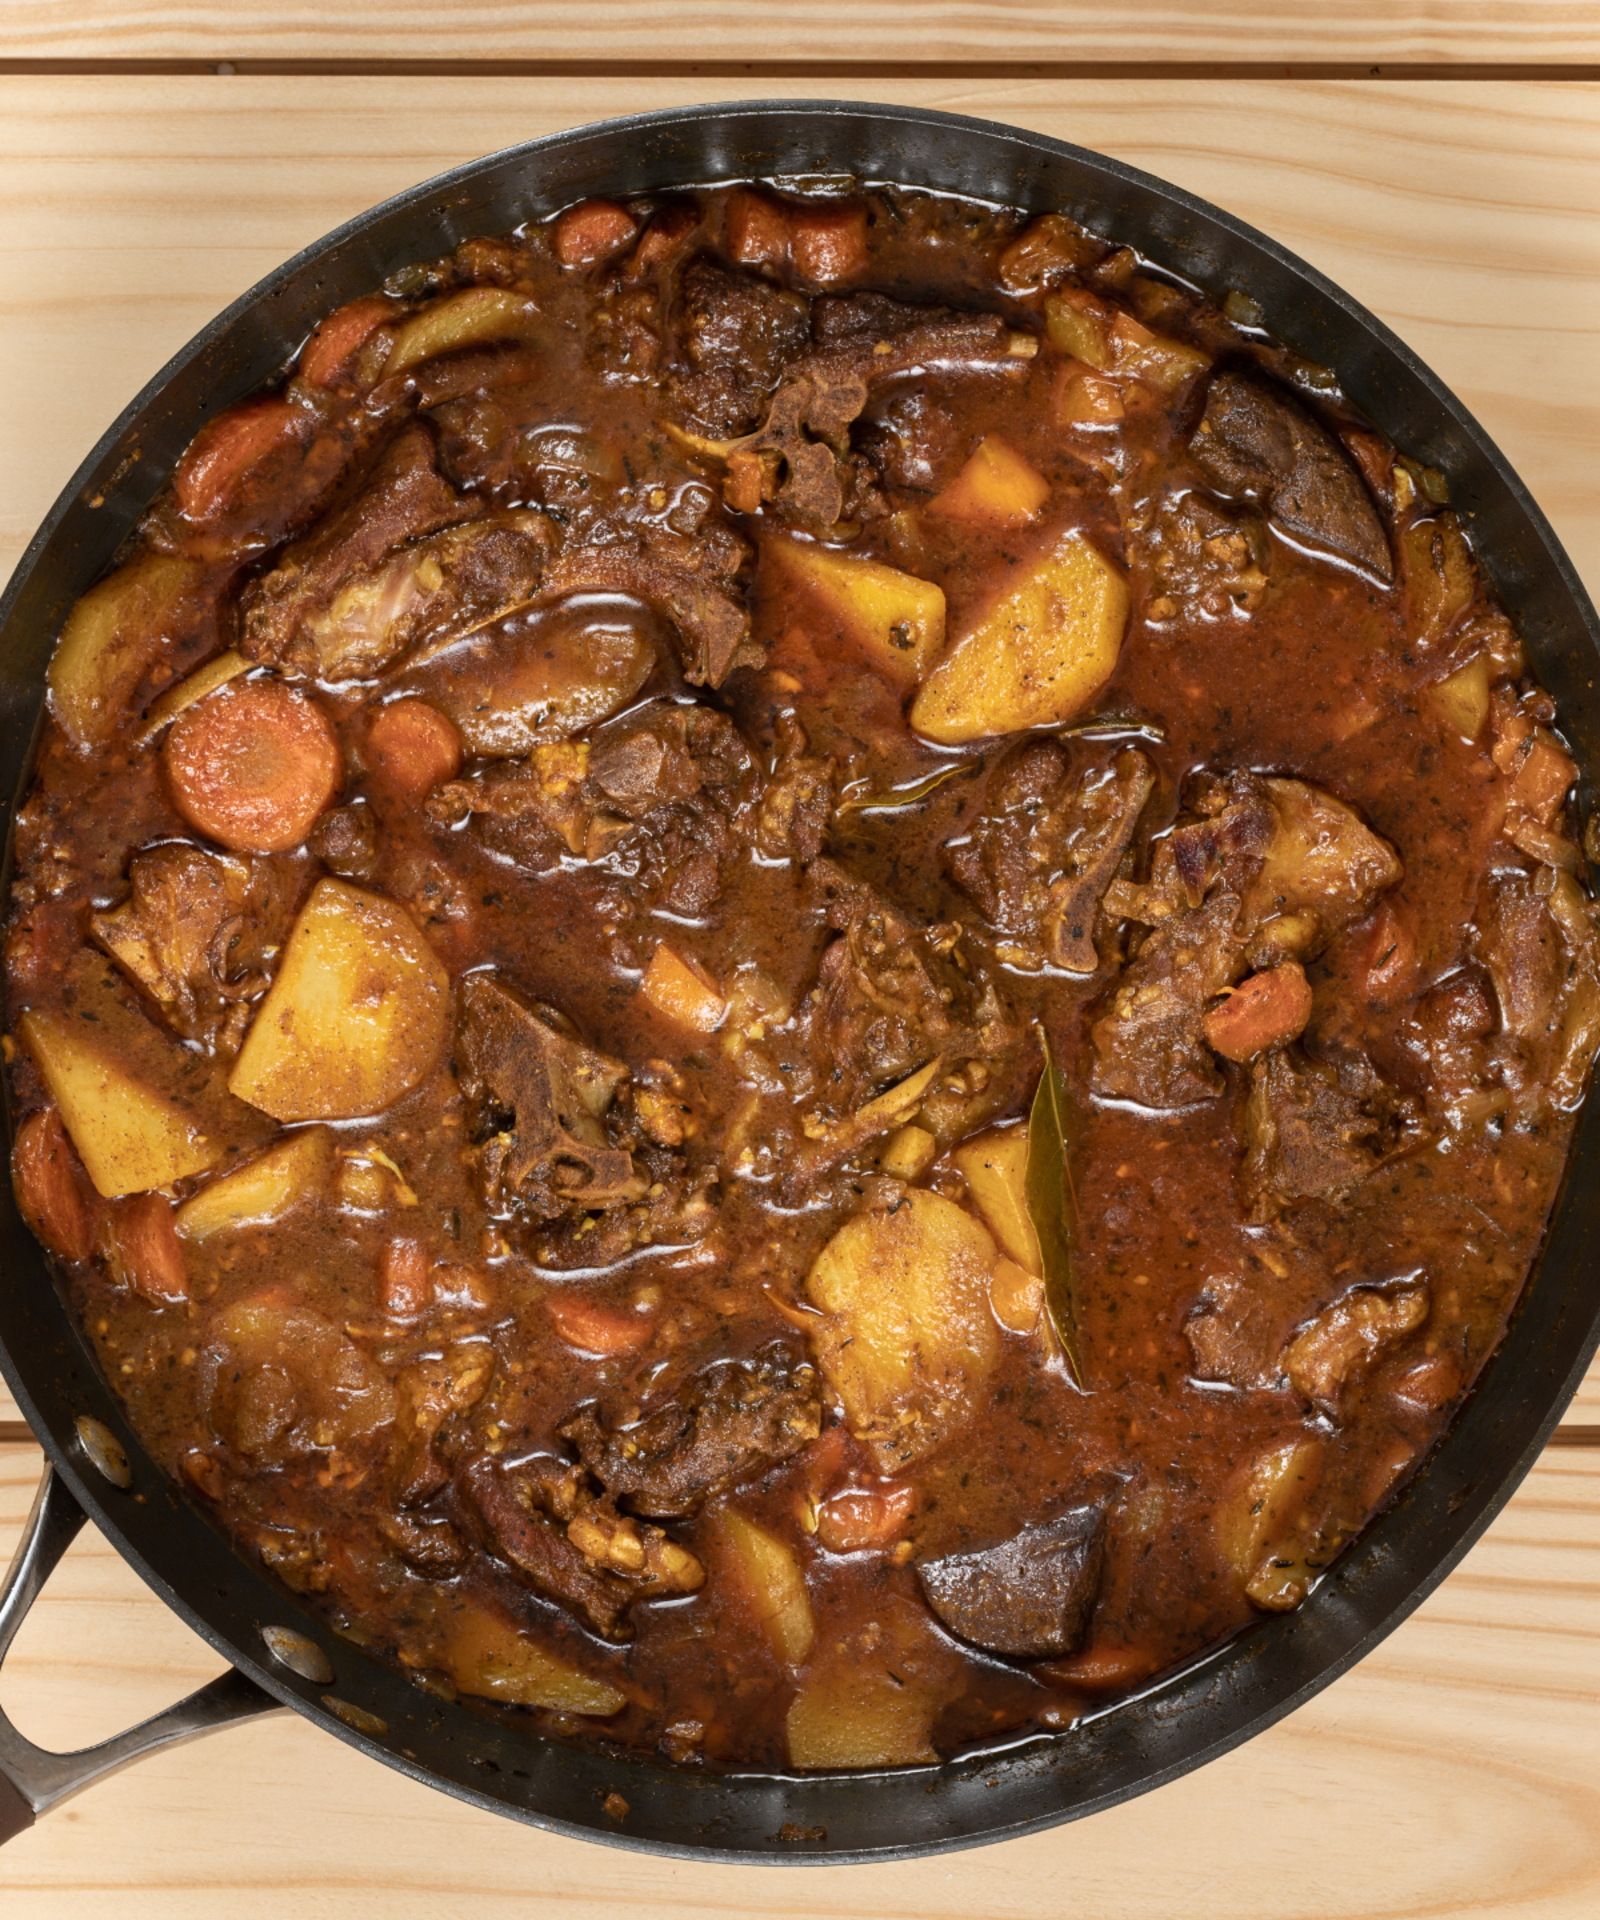 Oxtail dishes are extremely popular in Jamaica